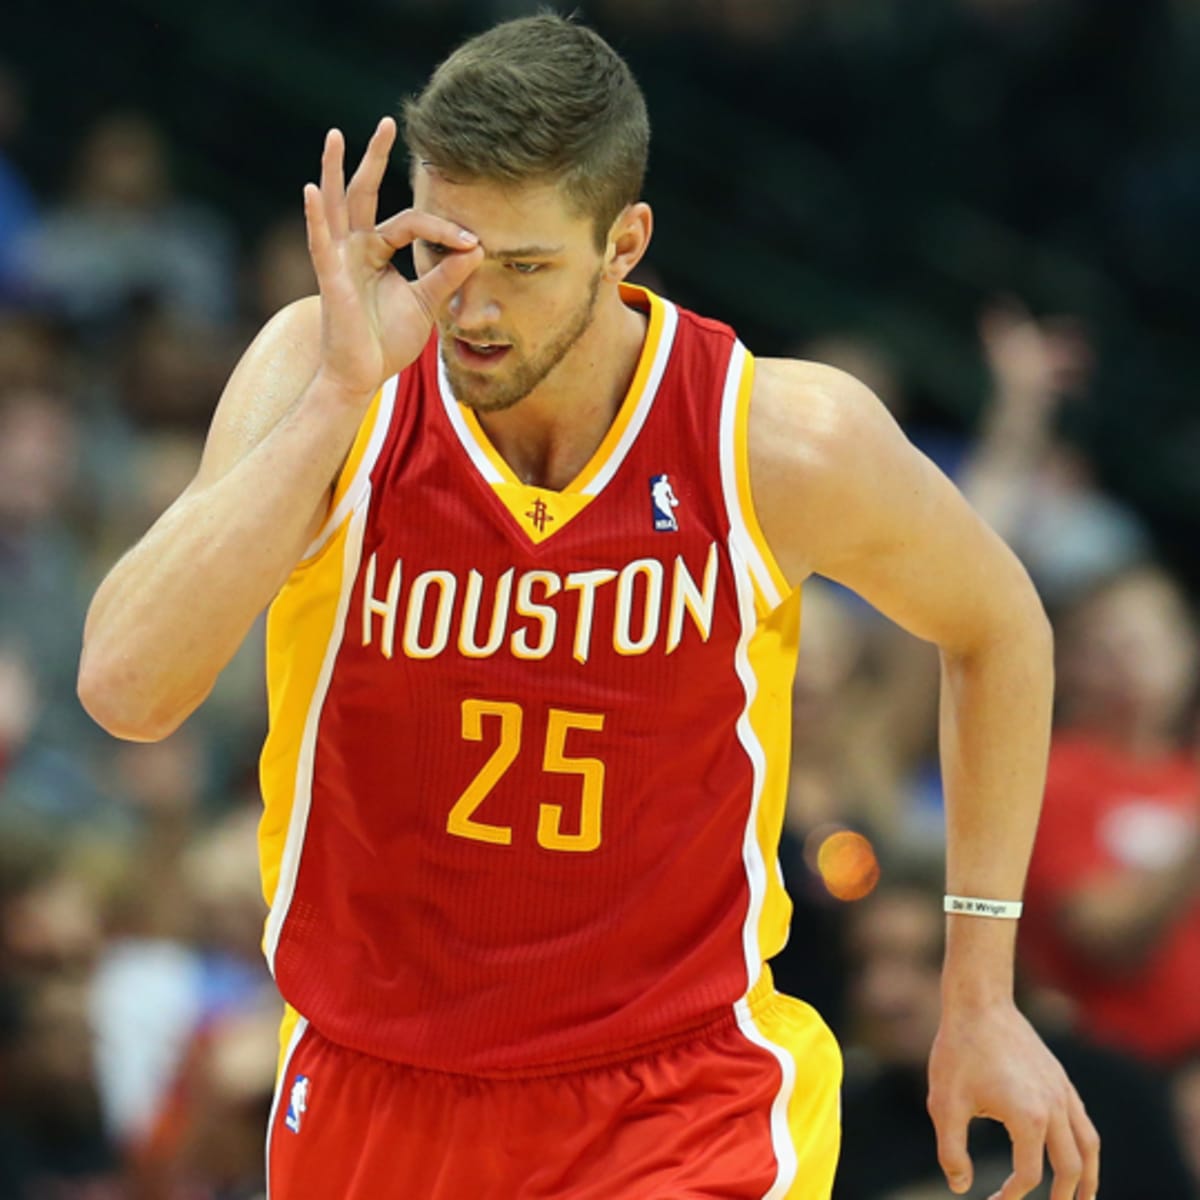 Chandler Parsons with Houston Rockets (Source: si.com)